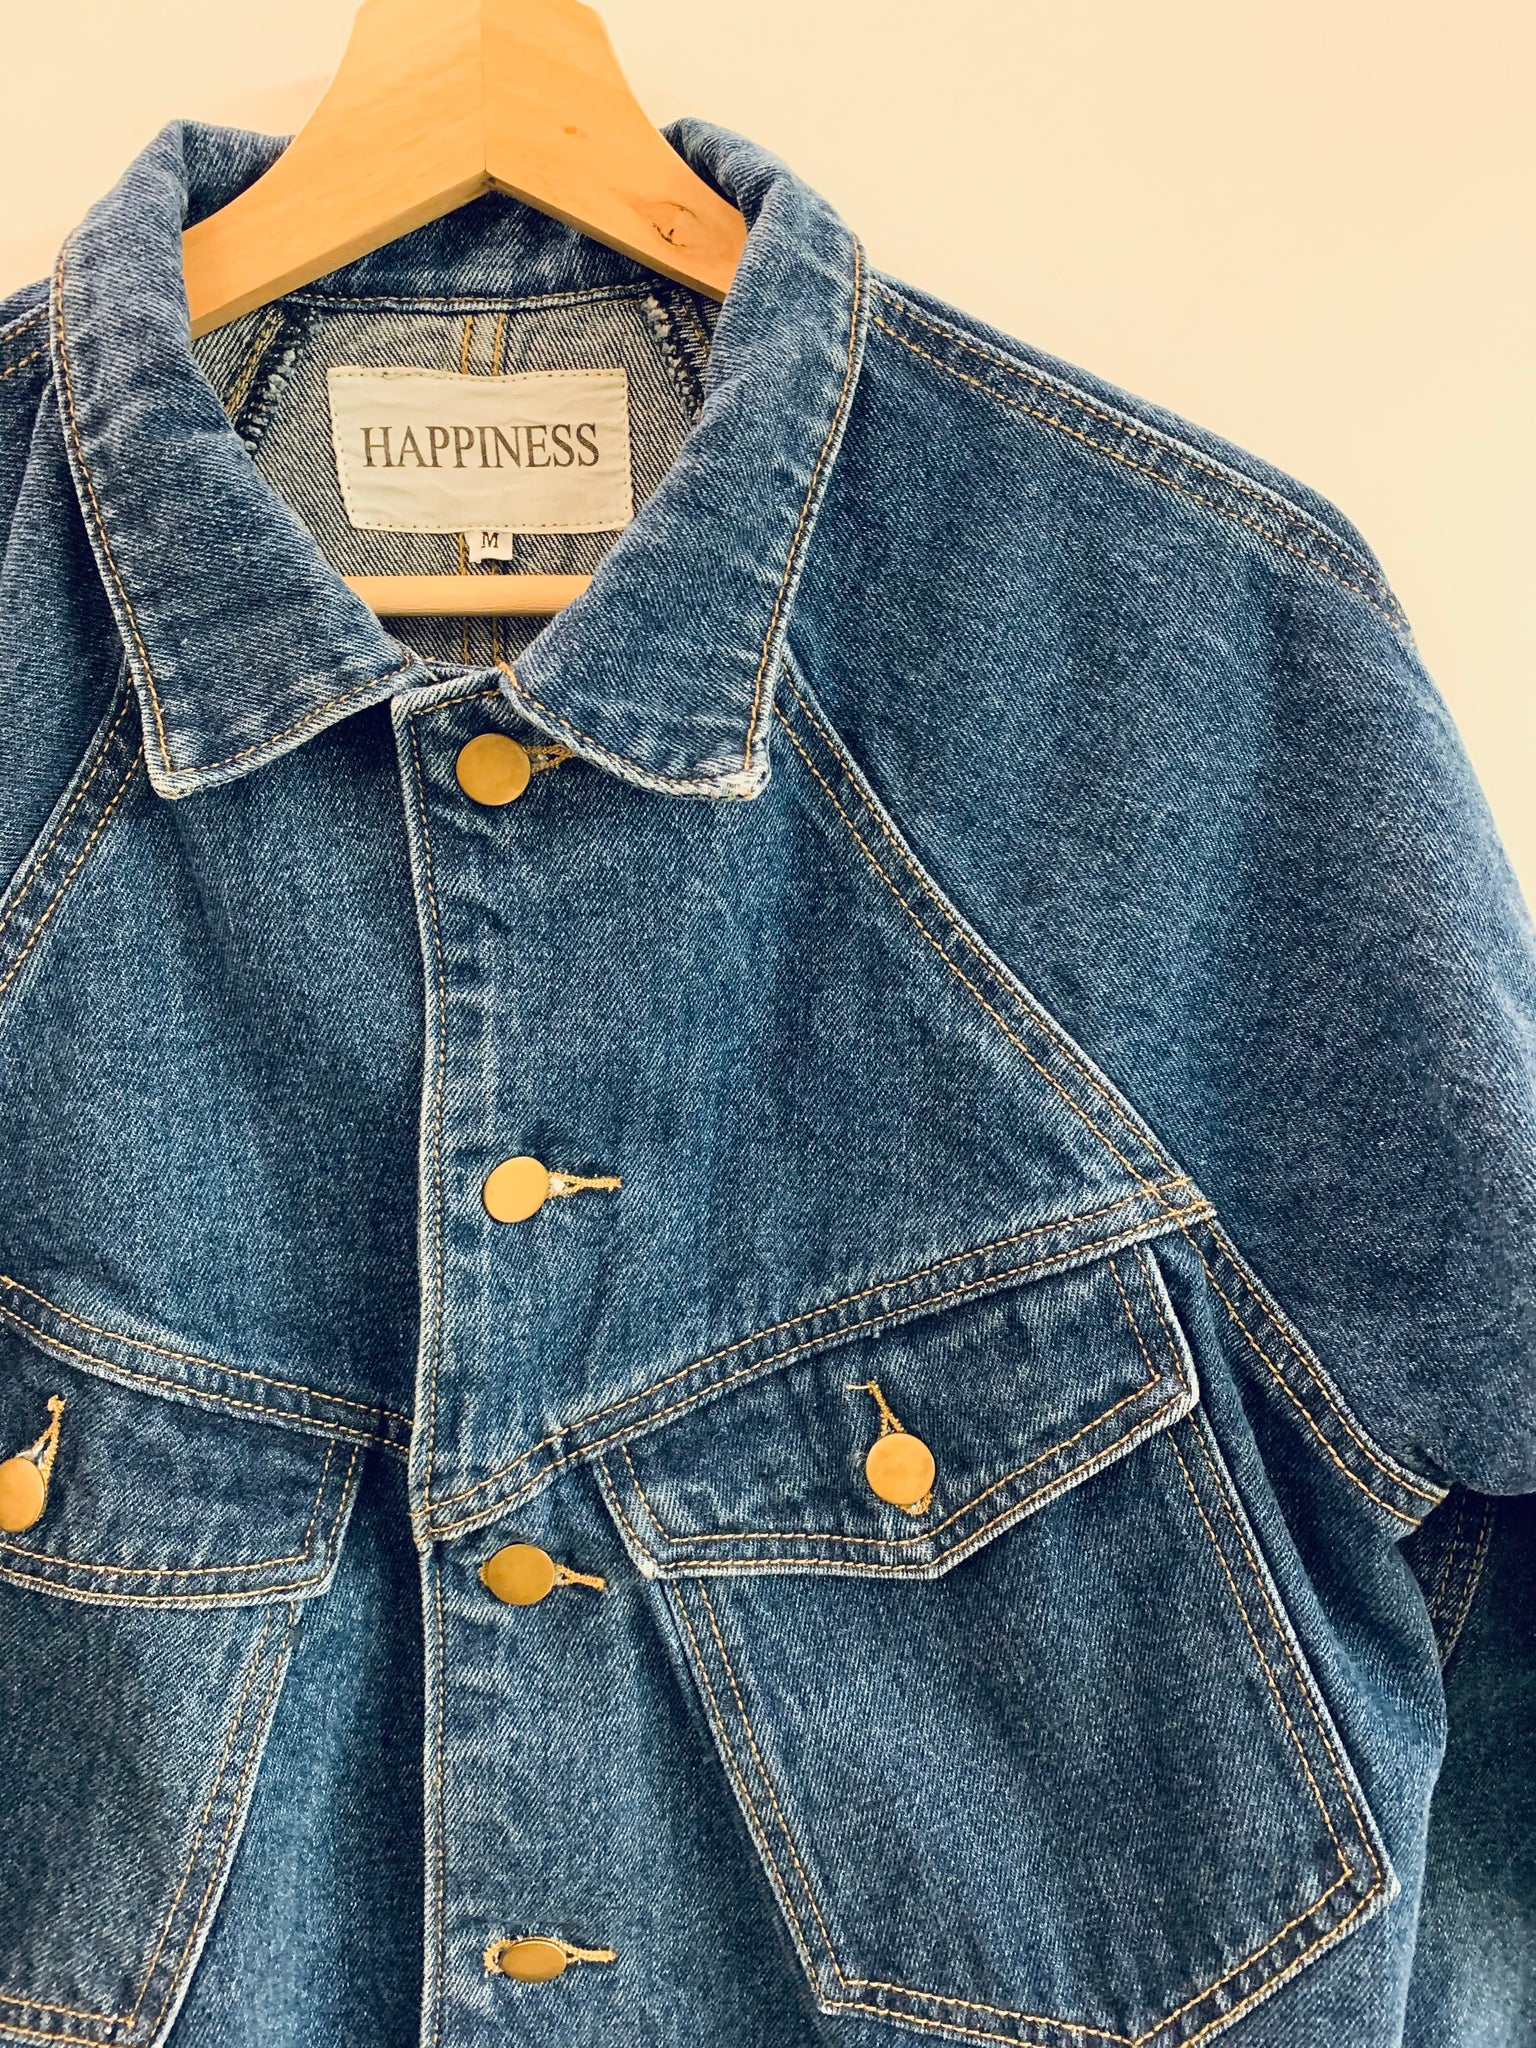 “Happiness” Cropped Jean Jacket